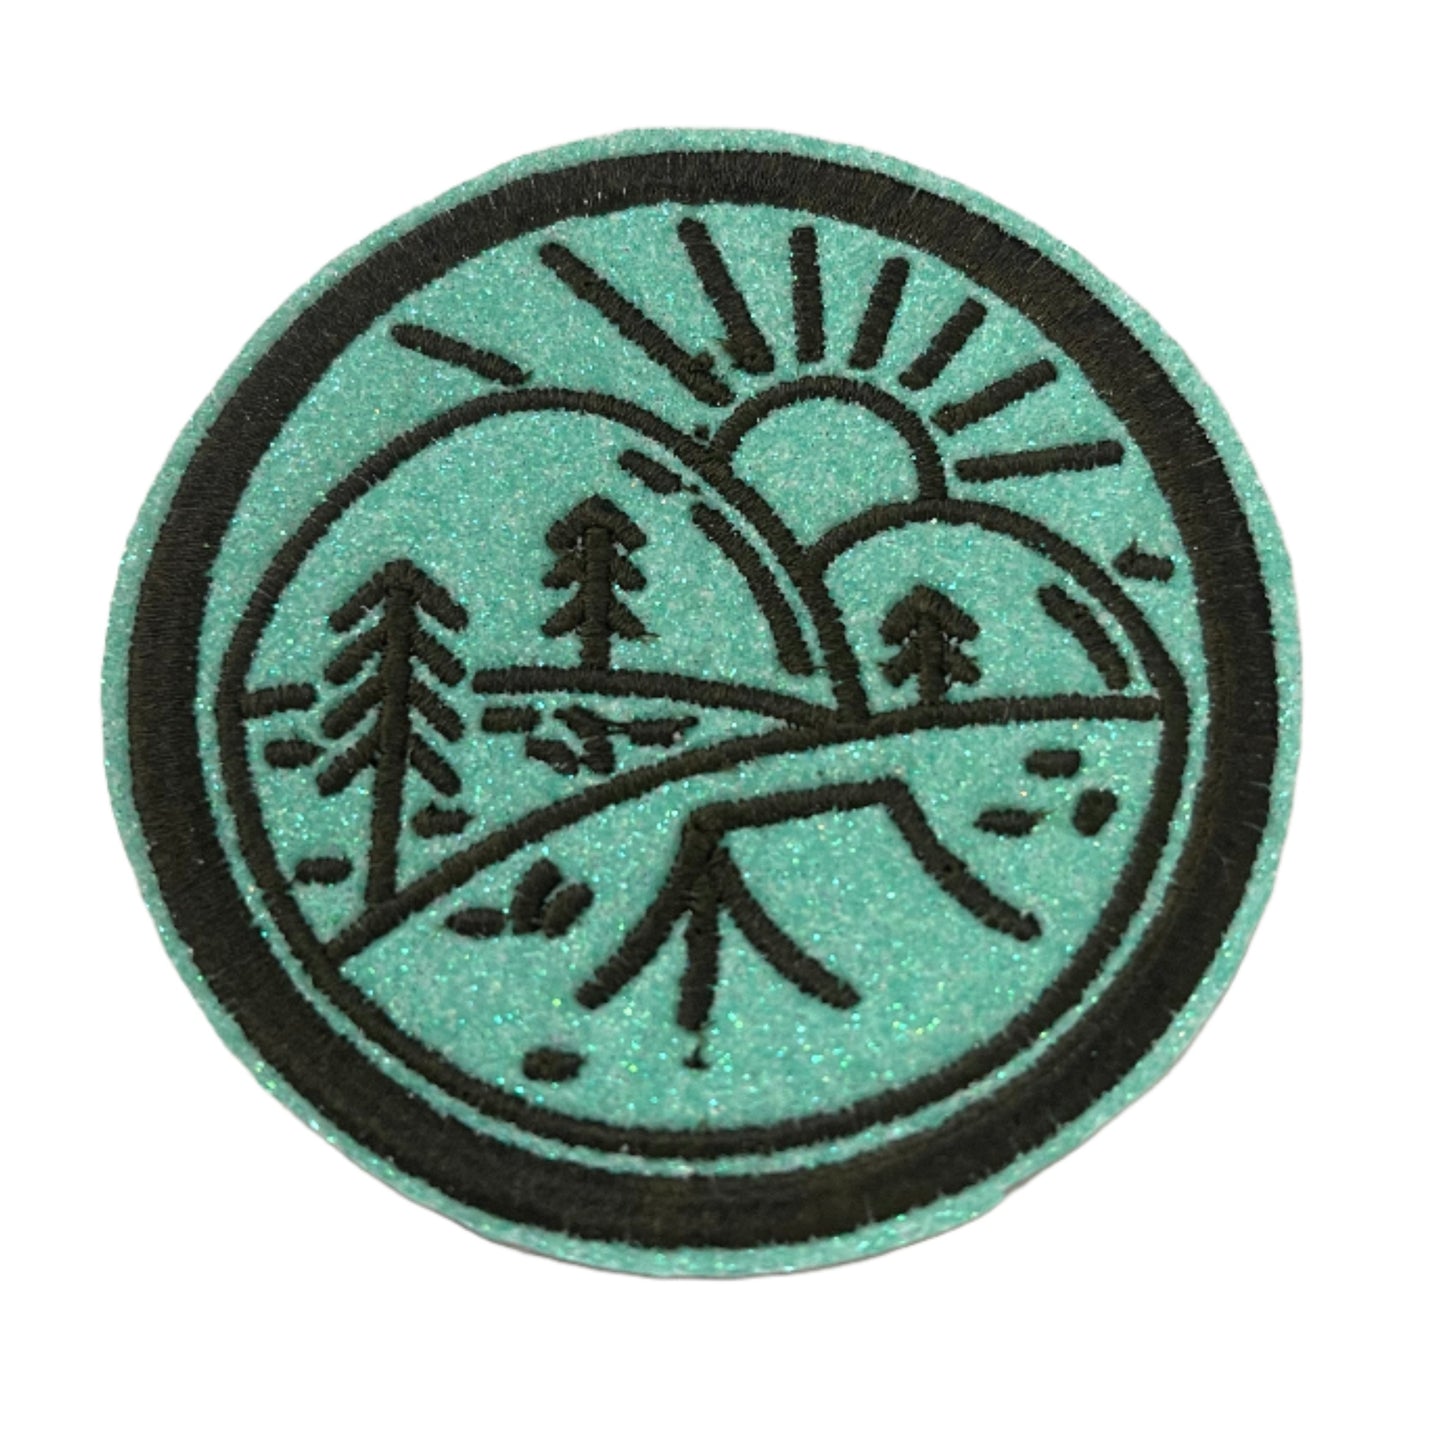 Handmade Nature Scene Iron-On Patch | Mint Green Background, Black Embroidery